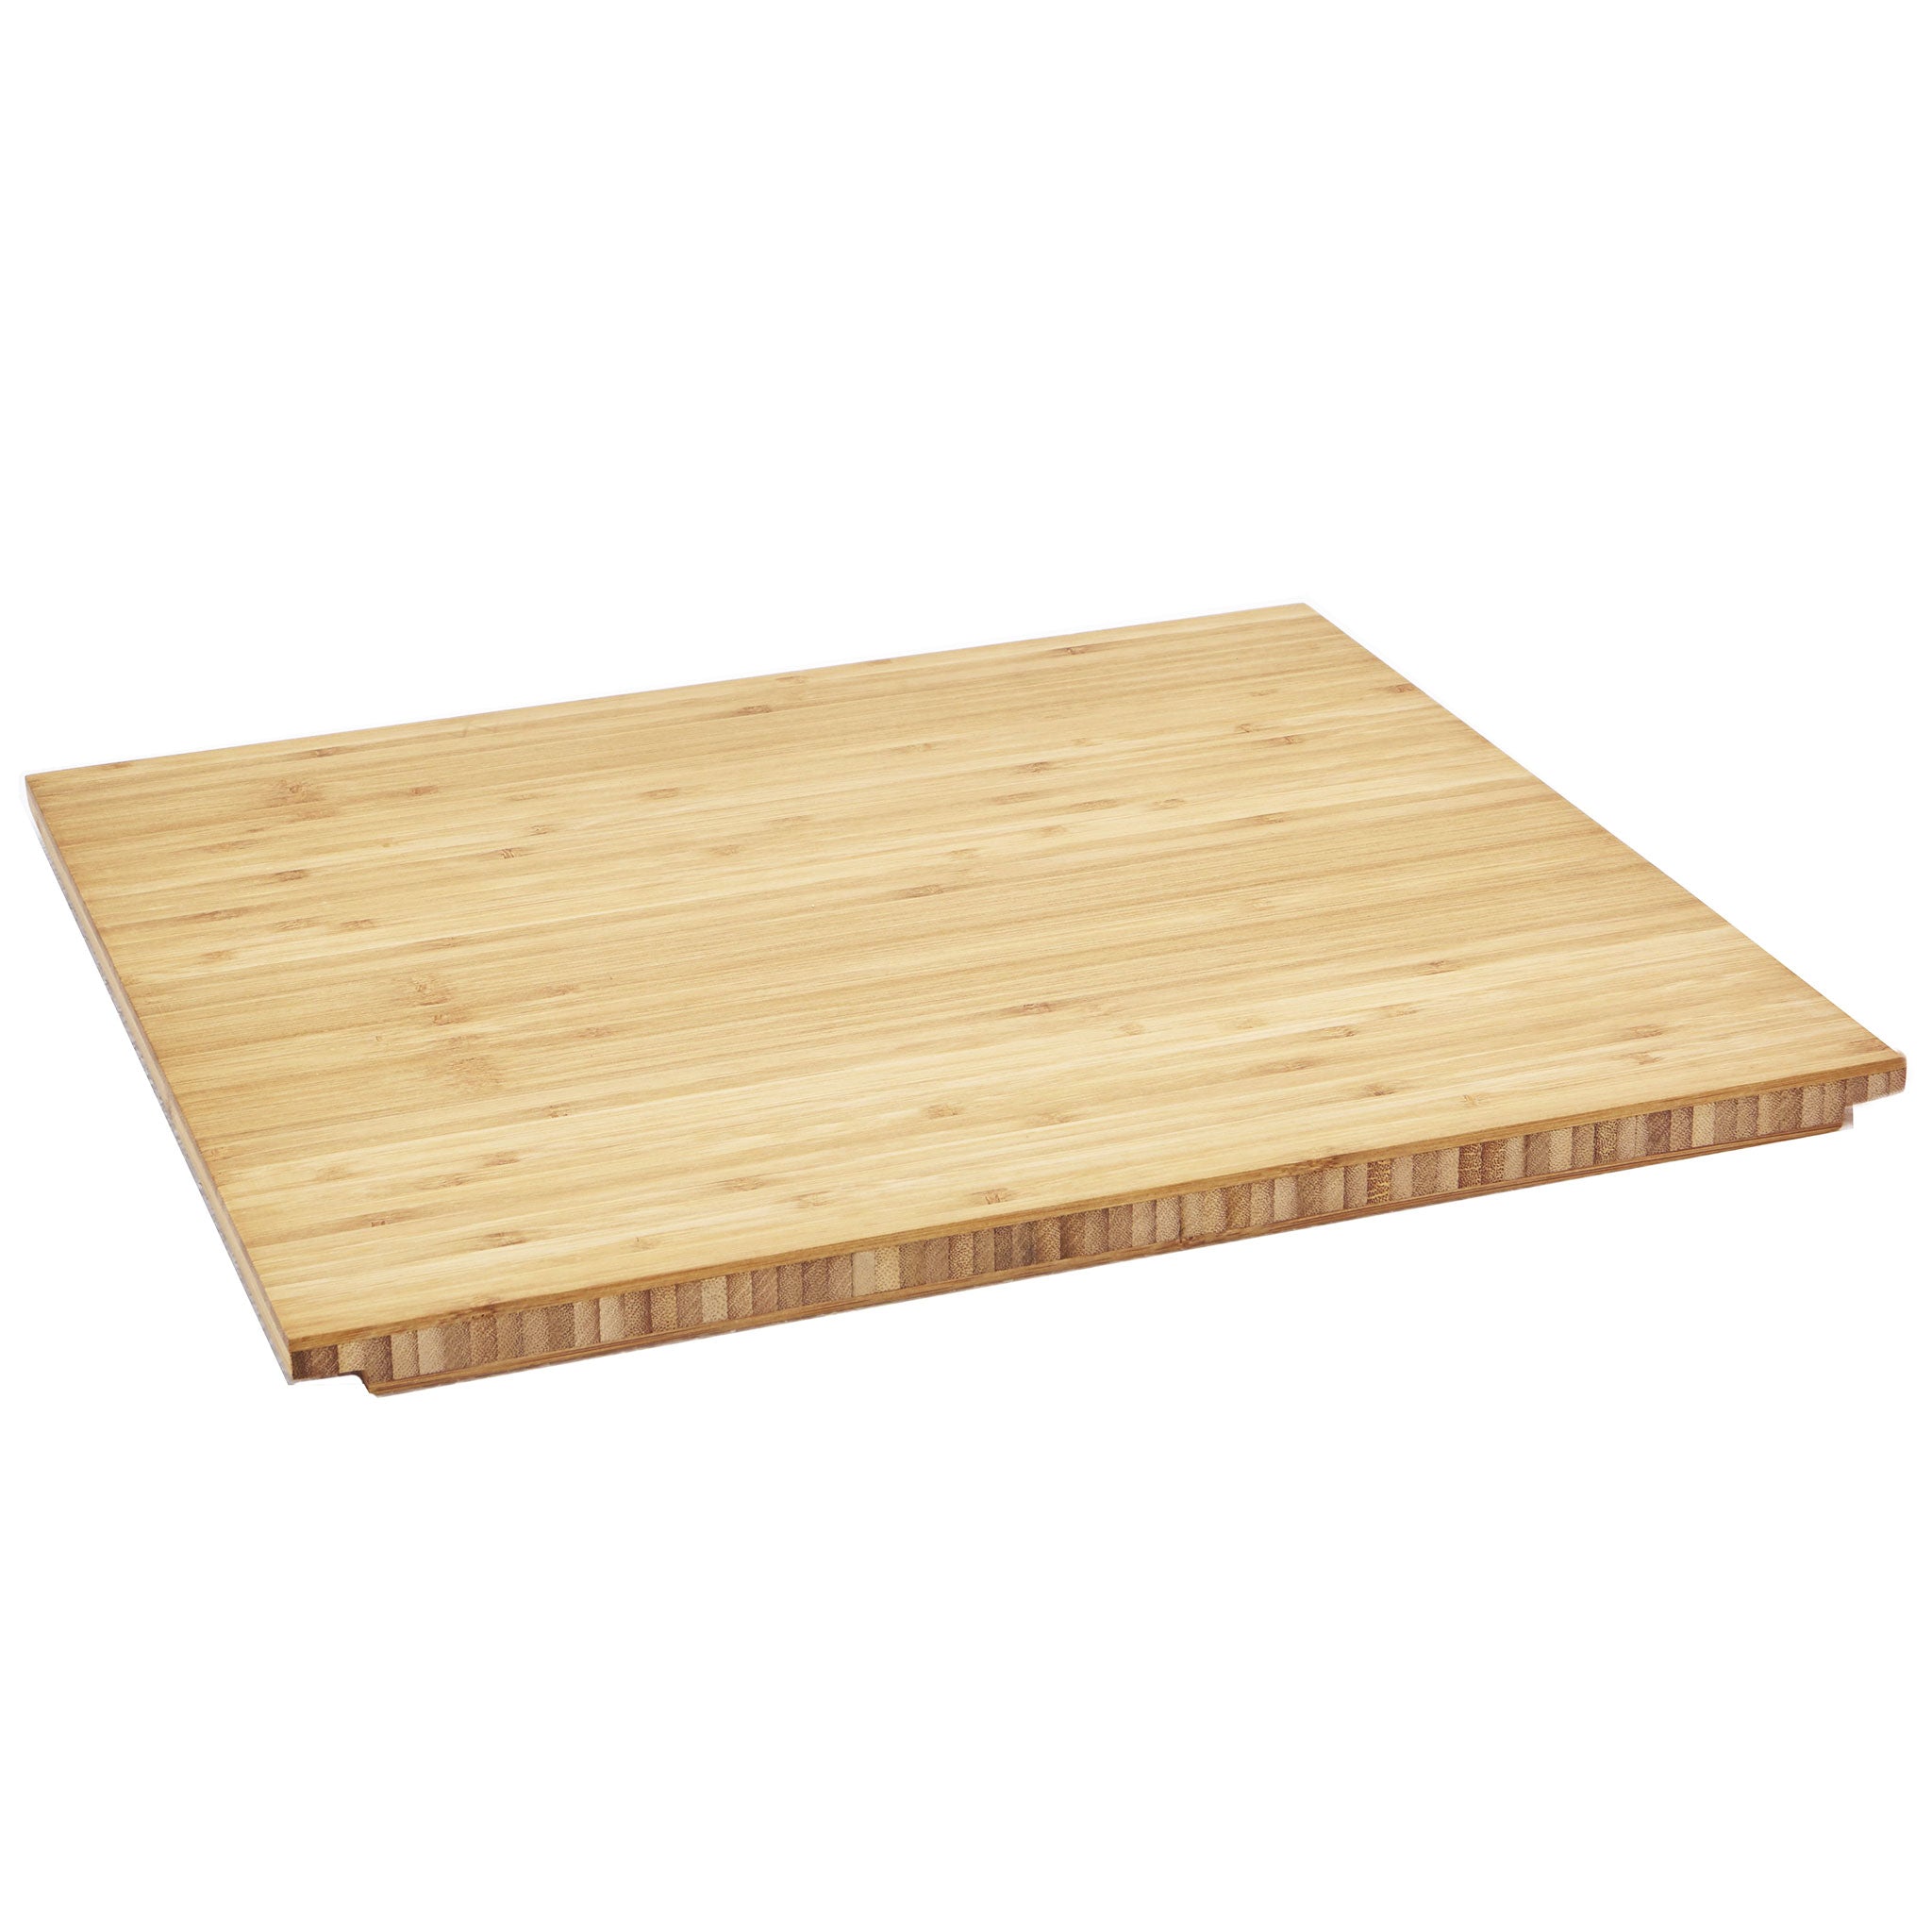 The Best Large Cutting Board from IKEA